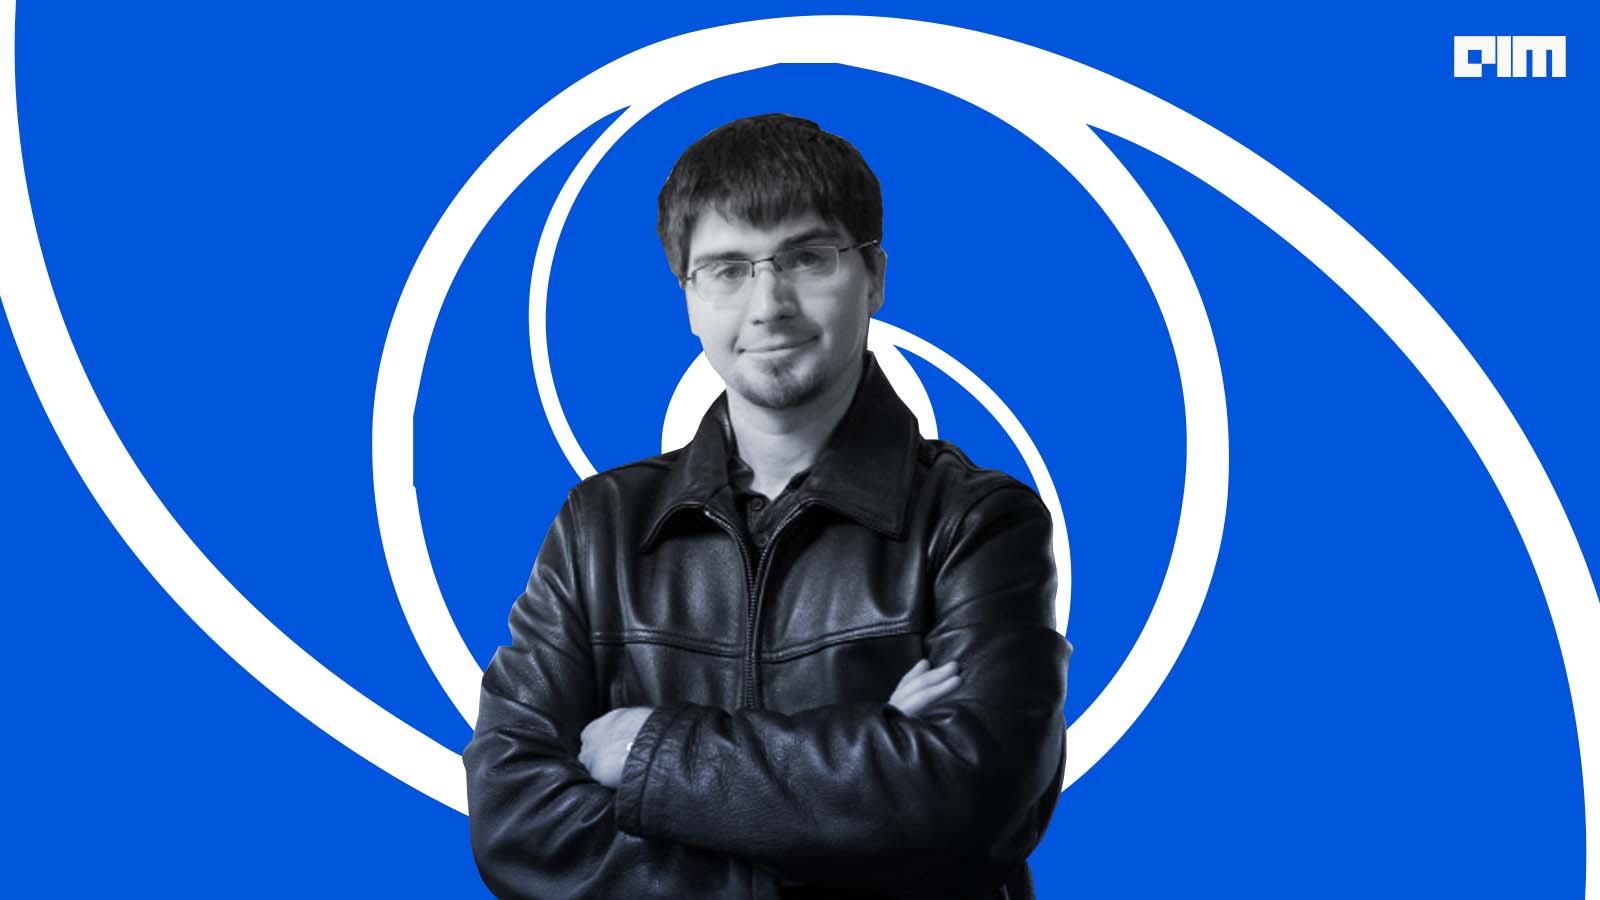 Ian Goodfellow has joined DeepMind now – What to expect?